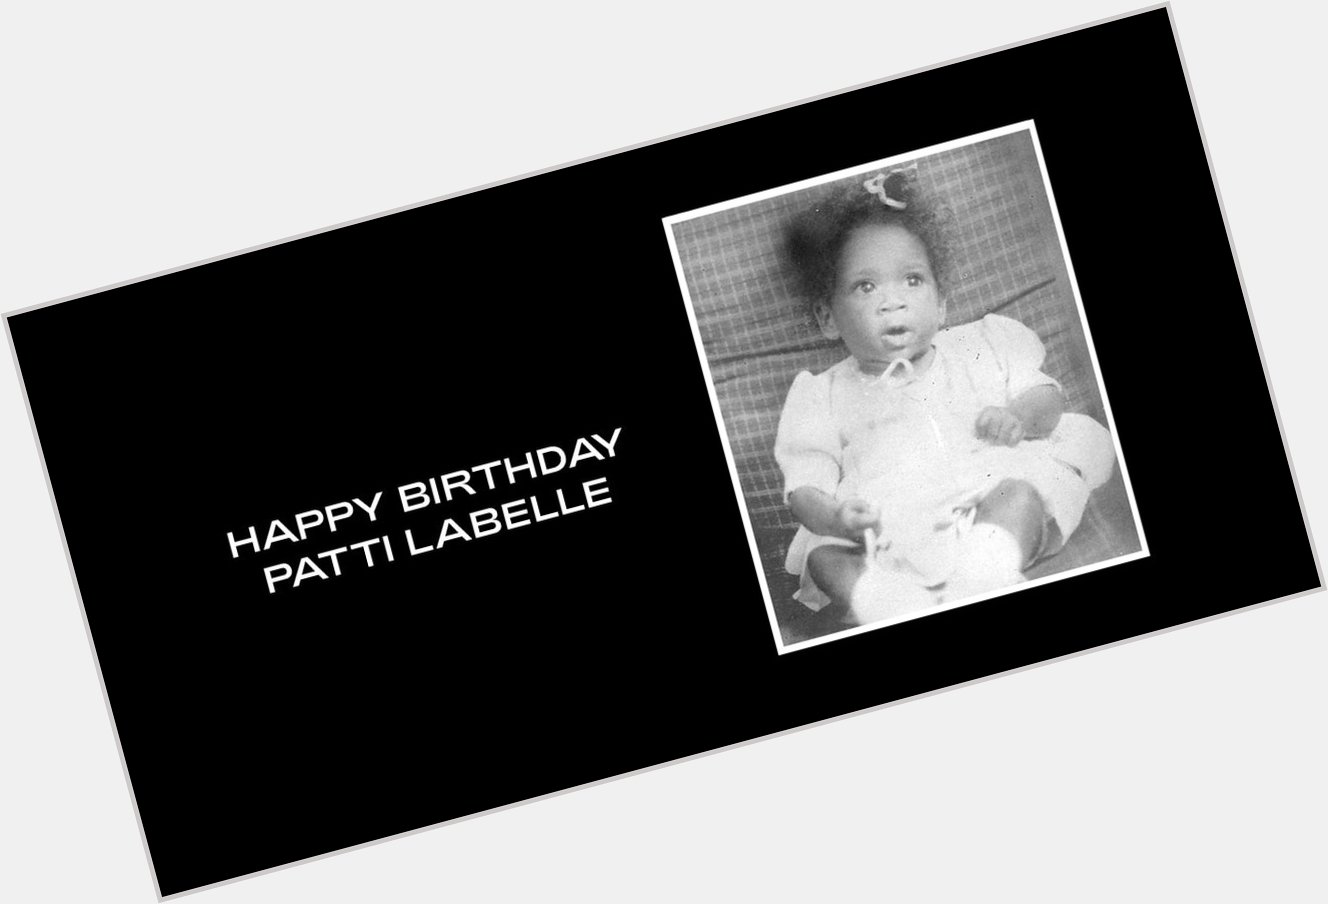  Happy Birthday Patti LaBelle, Octavia Spencer & Mike Myers  